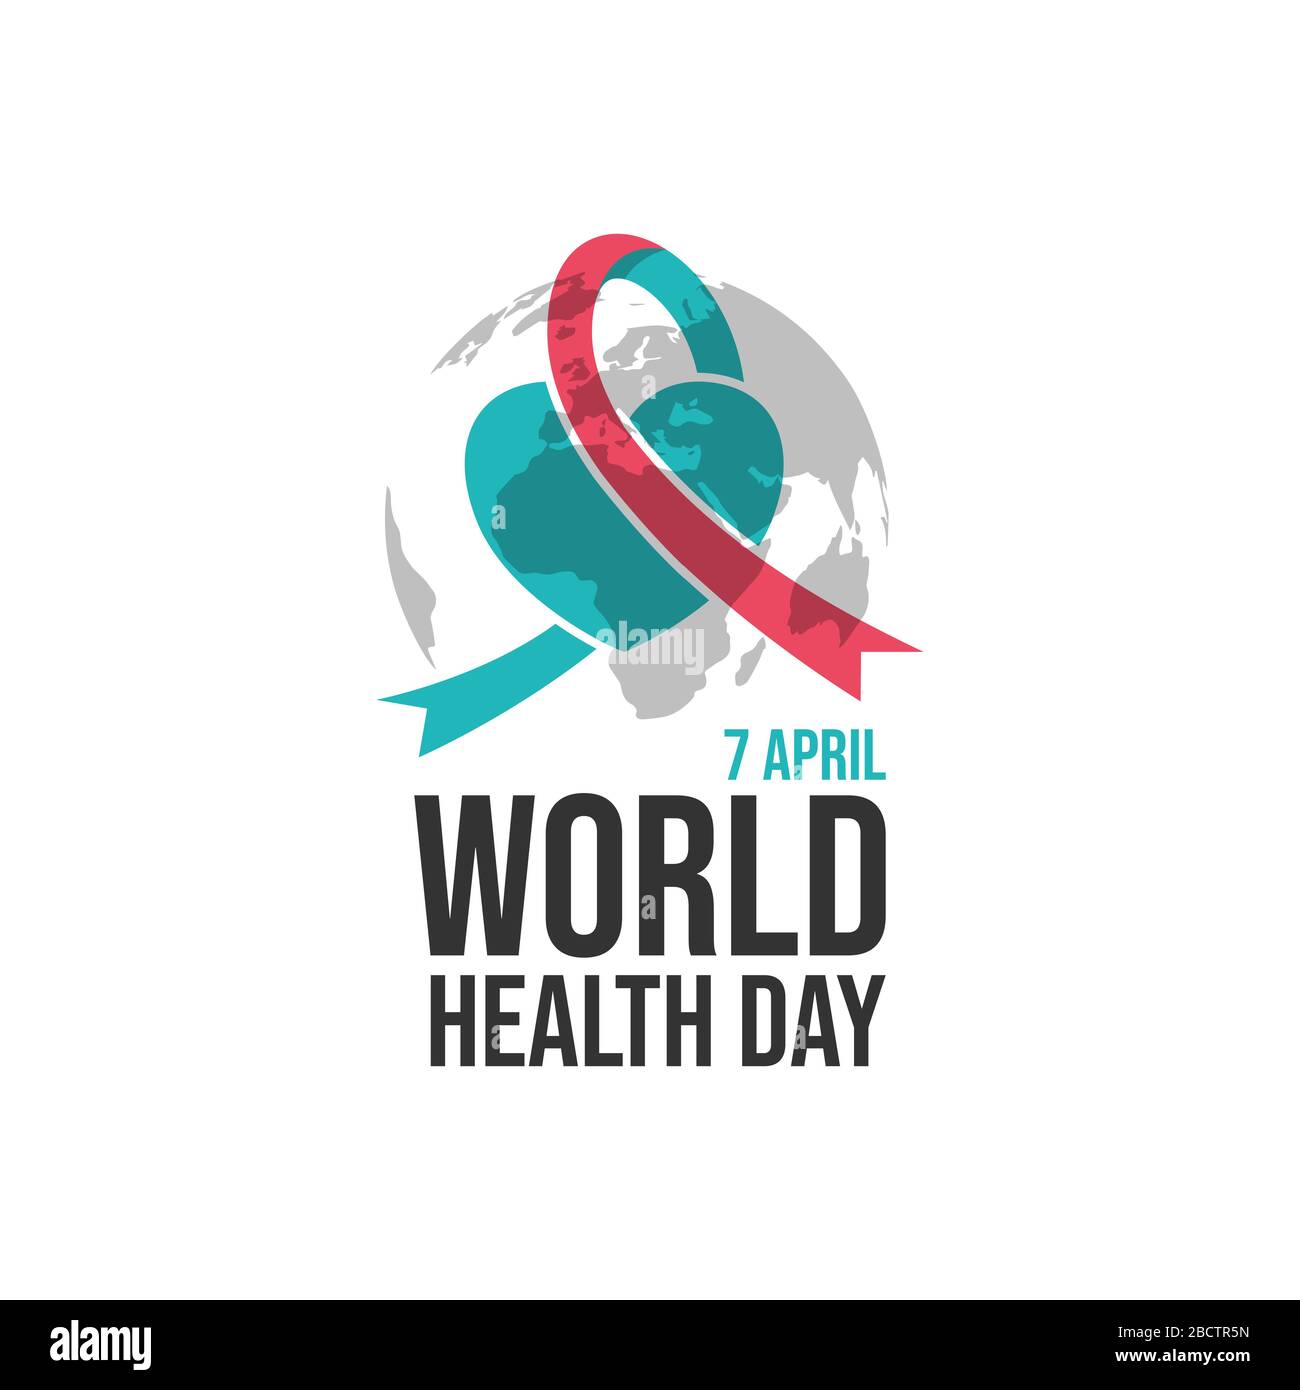 World health day background. Heart and ribbon concept of World Health Day Stock Vector